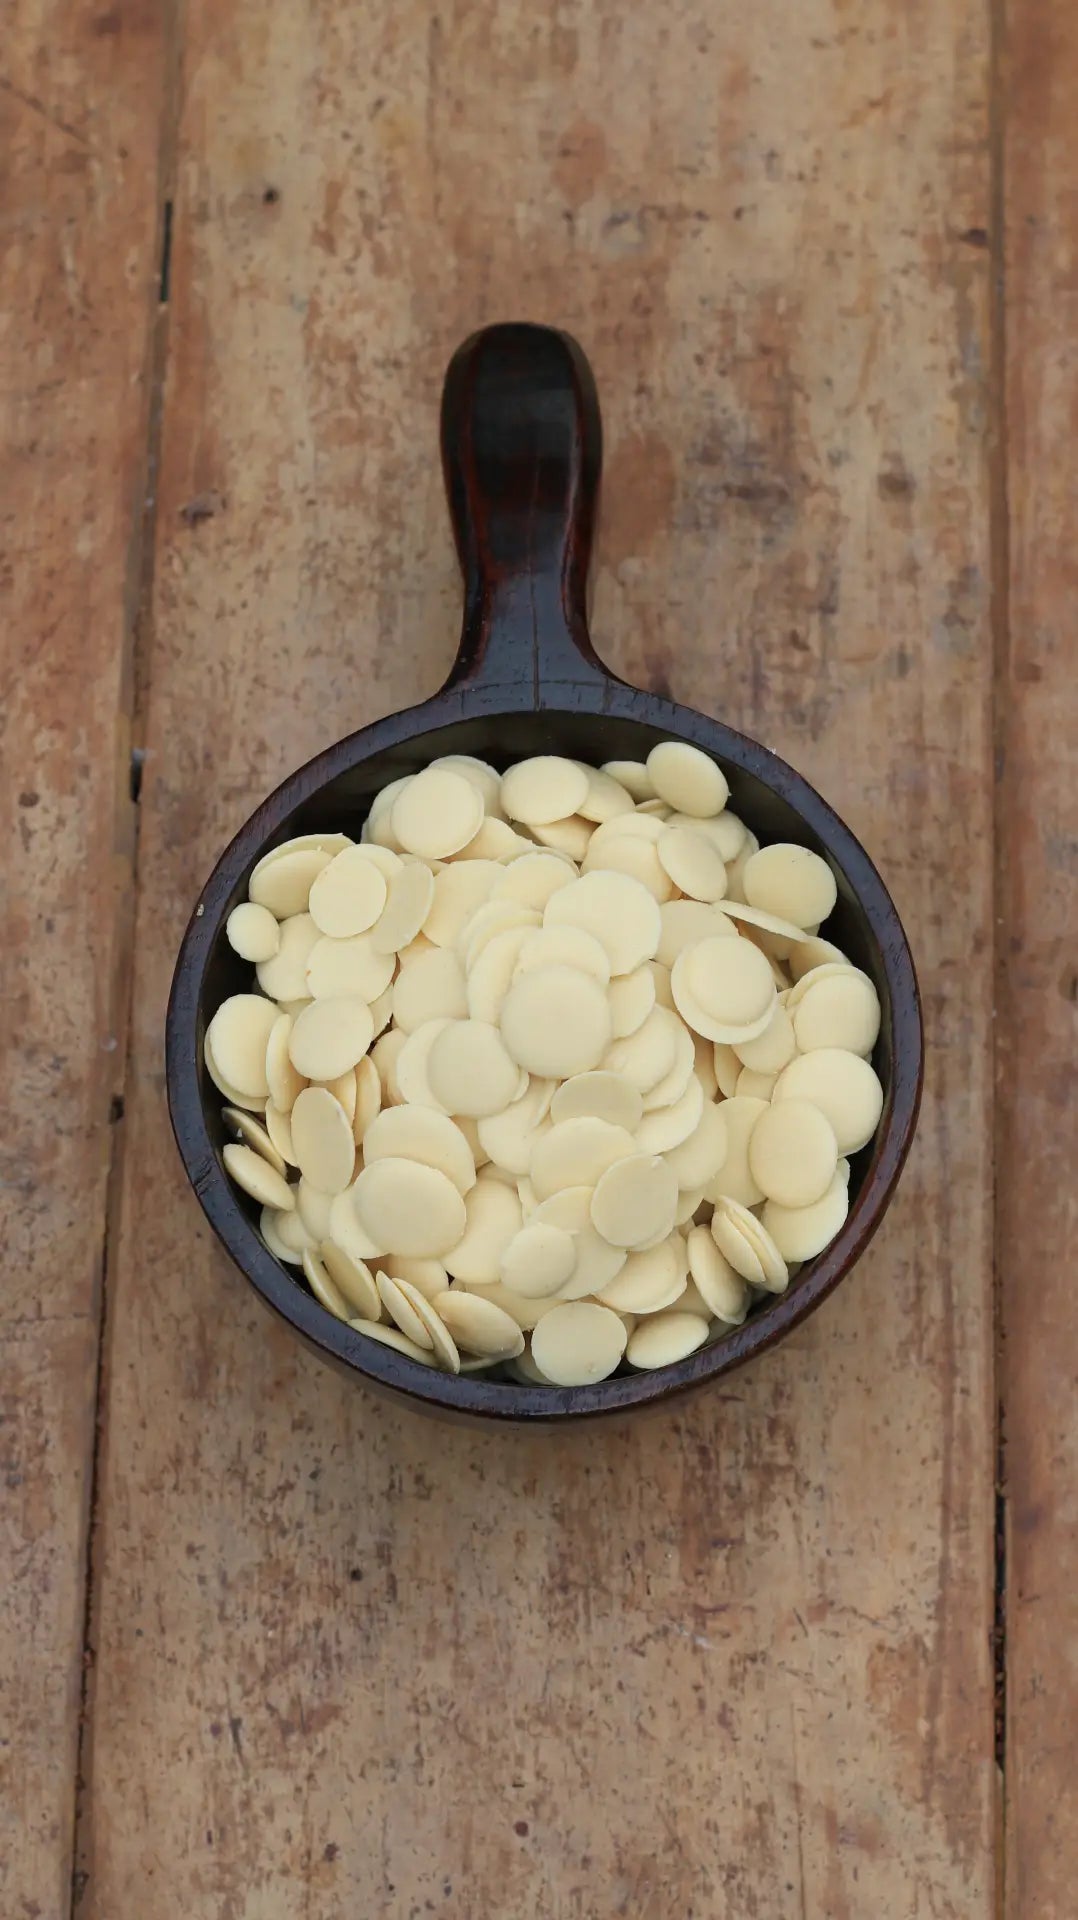 33% White Chocolate Couverture | Buttons | 1kg